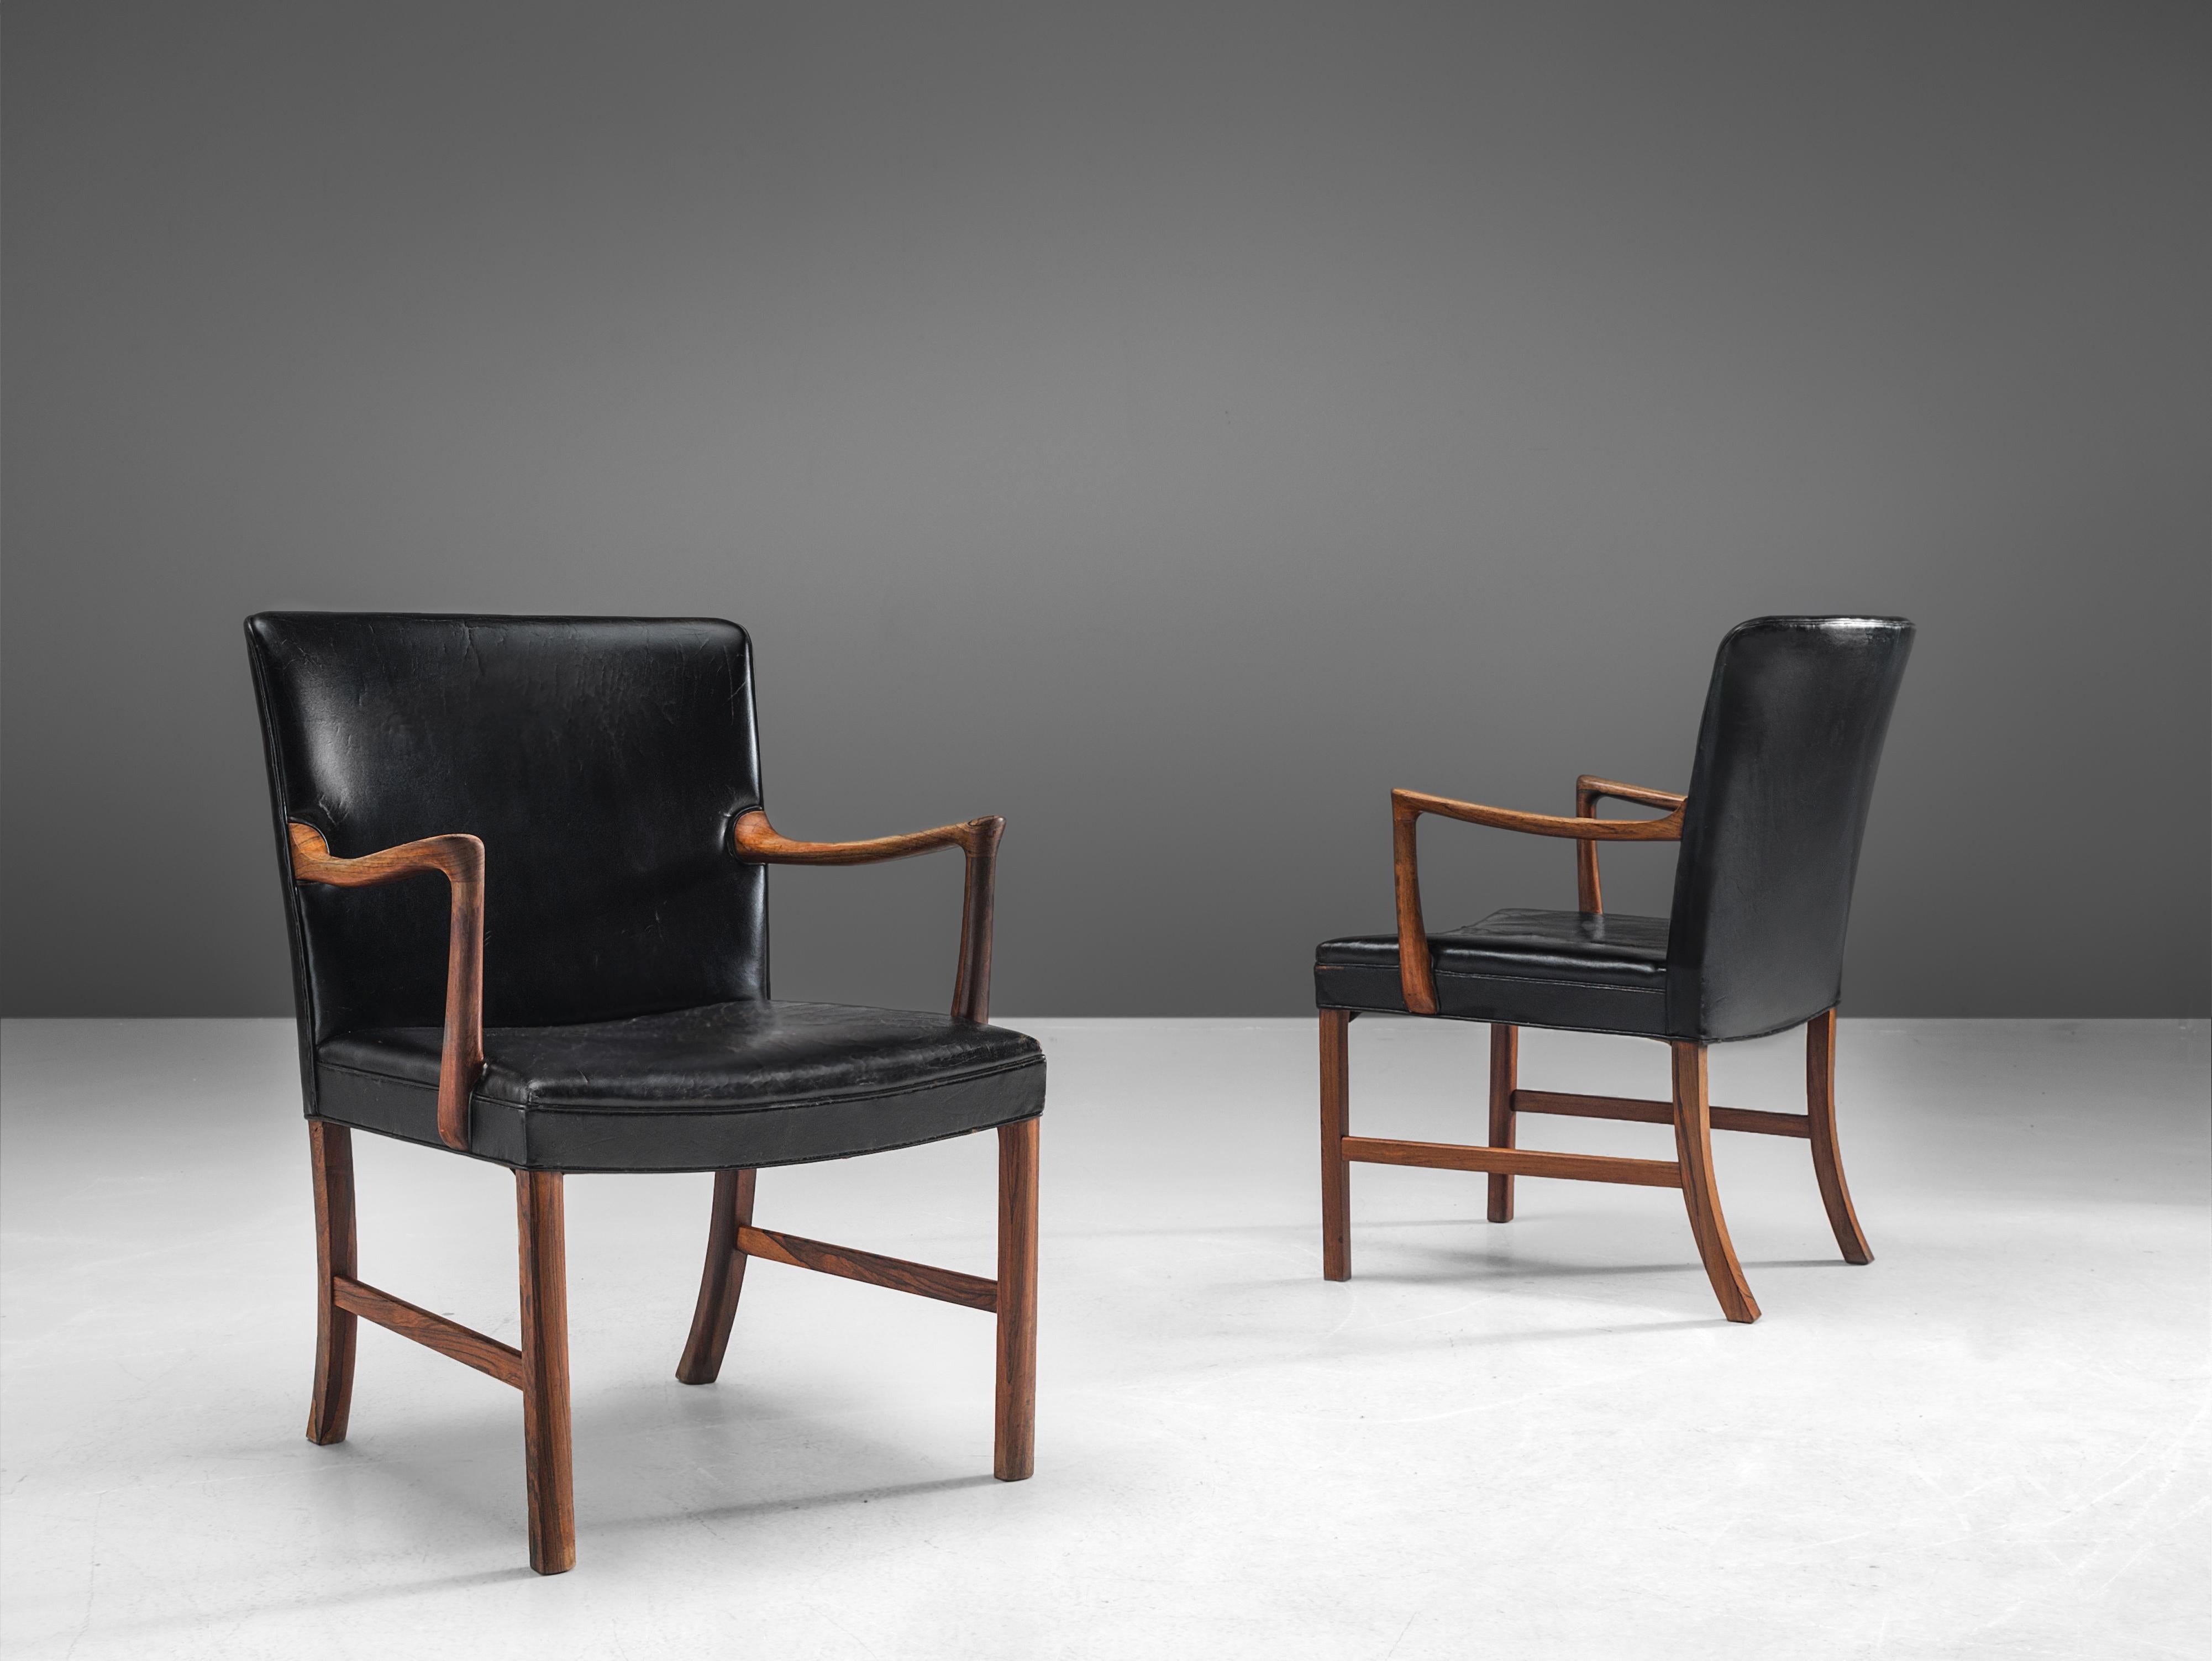 Ole Wanscher for A. J. Iversen, pair of armchairs, rosewood, leather, Denmark, 1940

This pair of elegant easy chairs in black leather and rosewood are designed by the Danish designer Ole Wanscher. The chairs are wide and highly comfortable. The